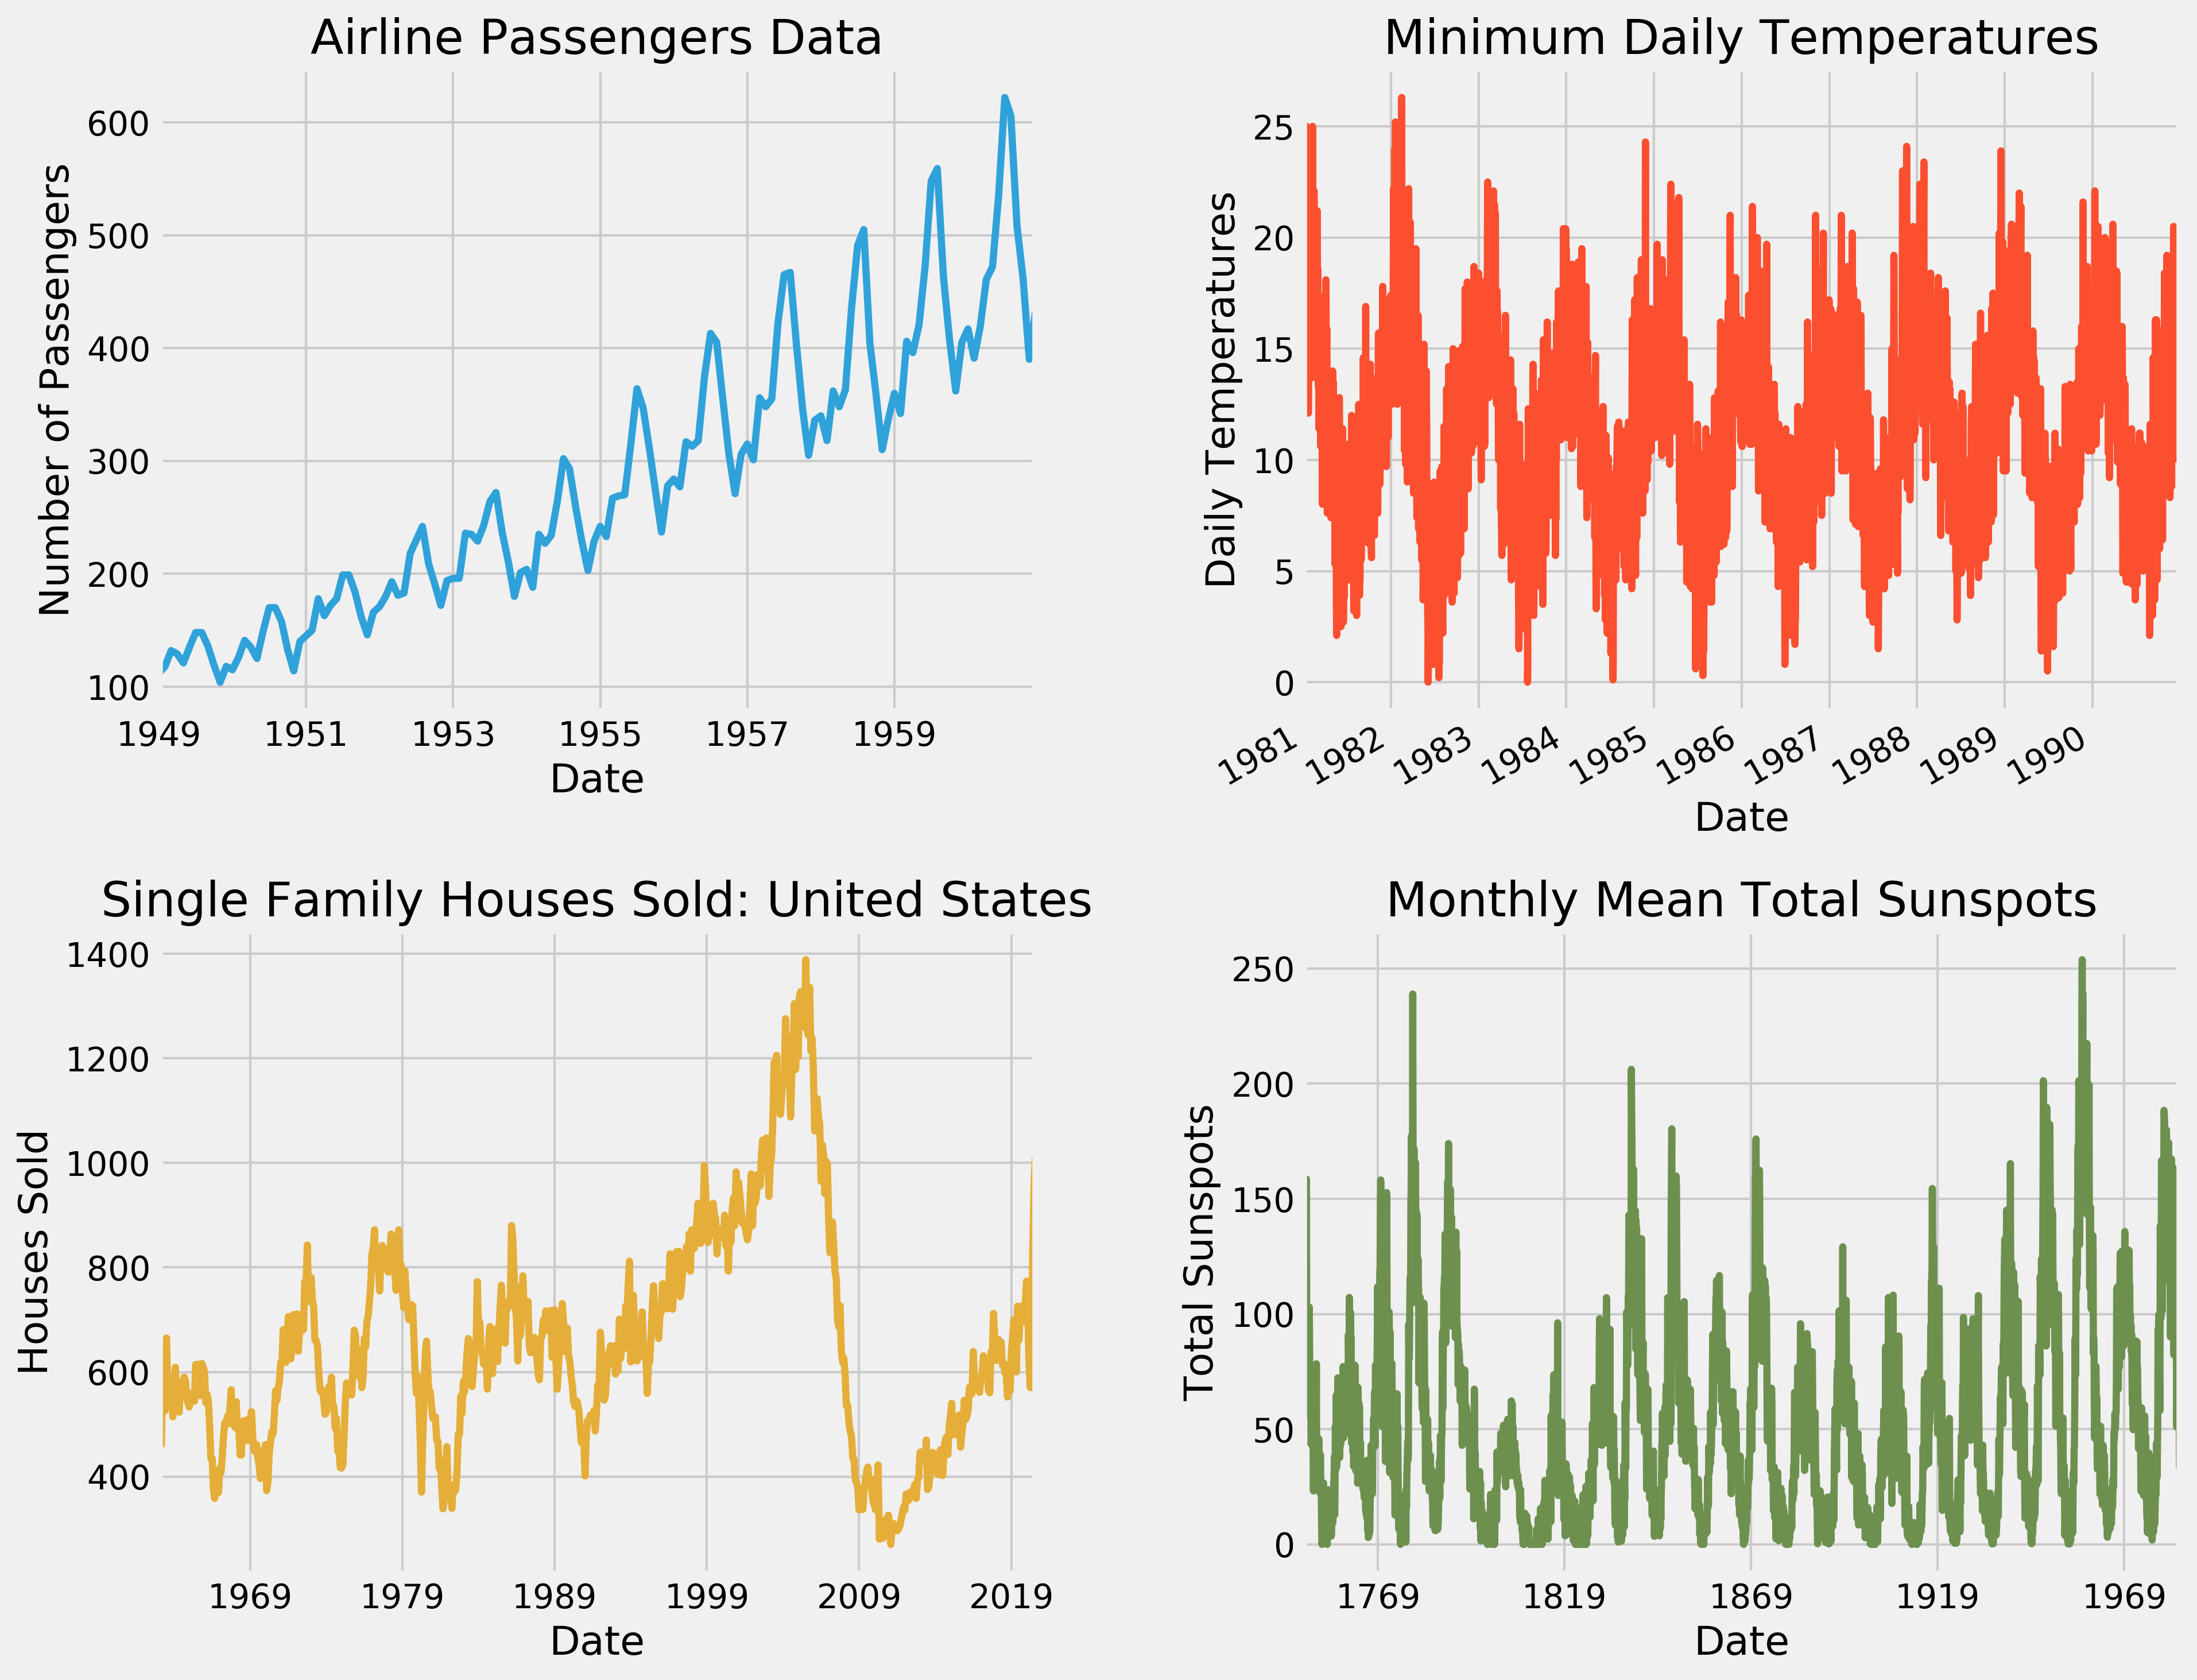 Time-series data